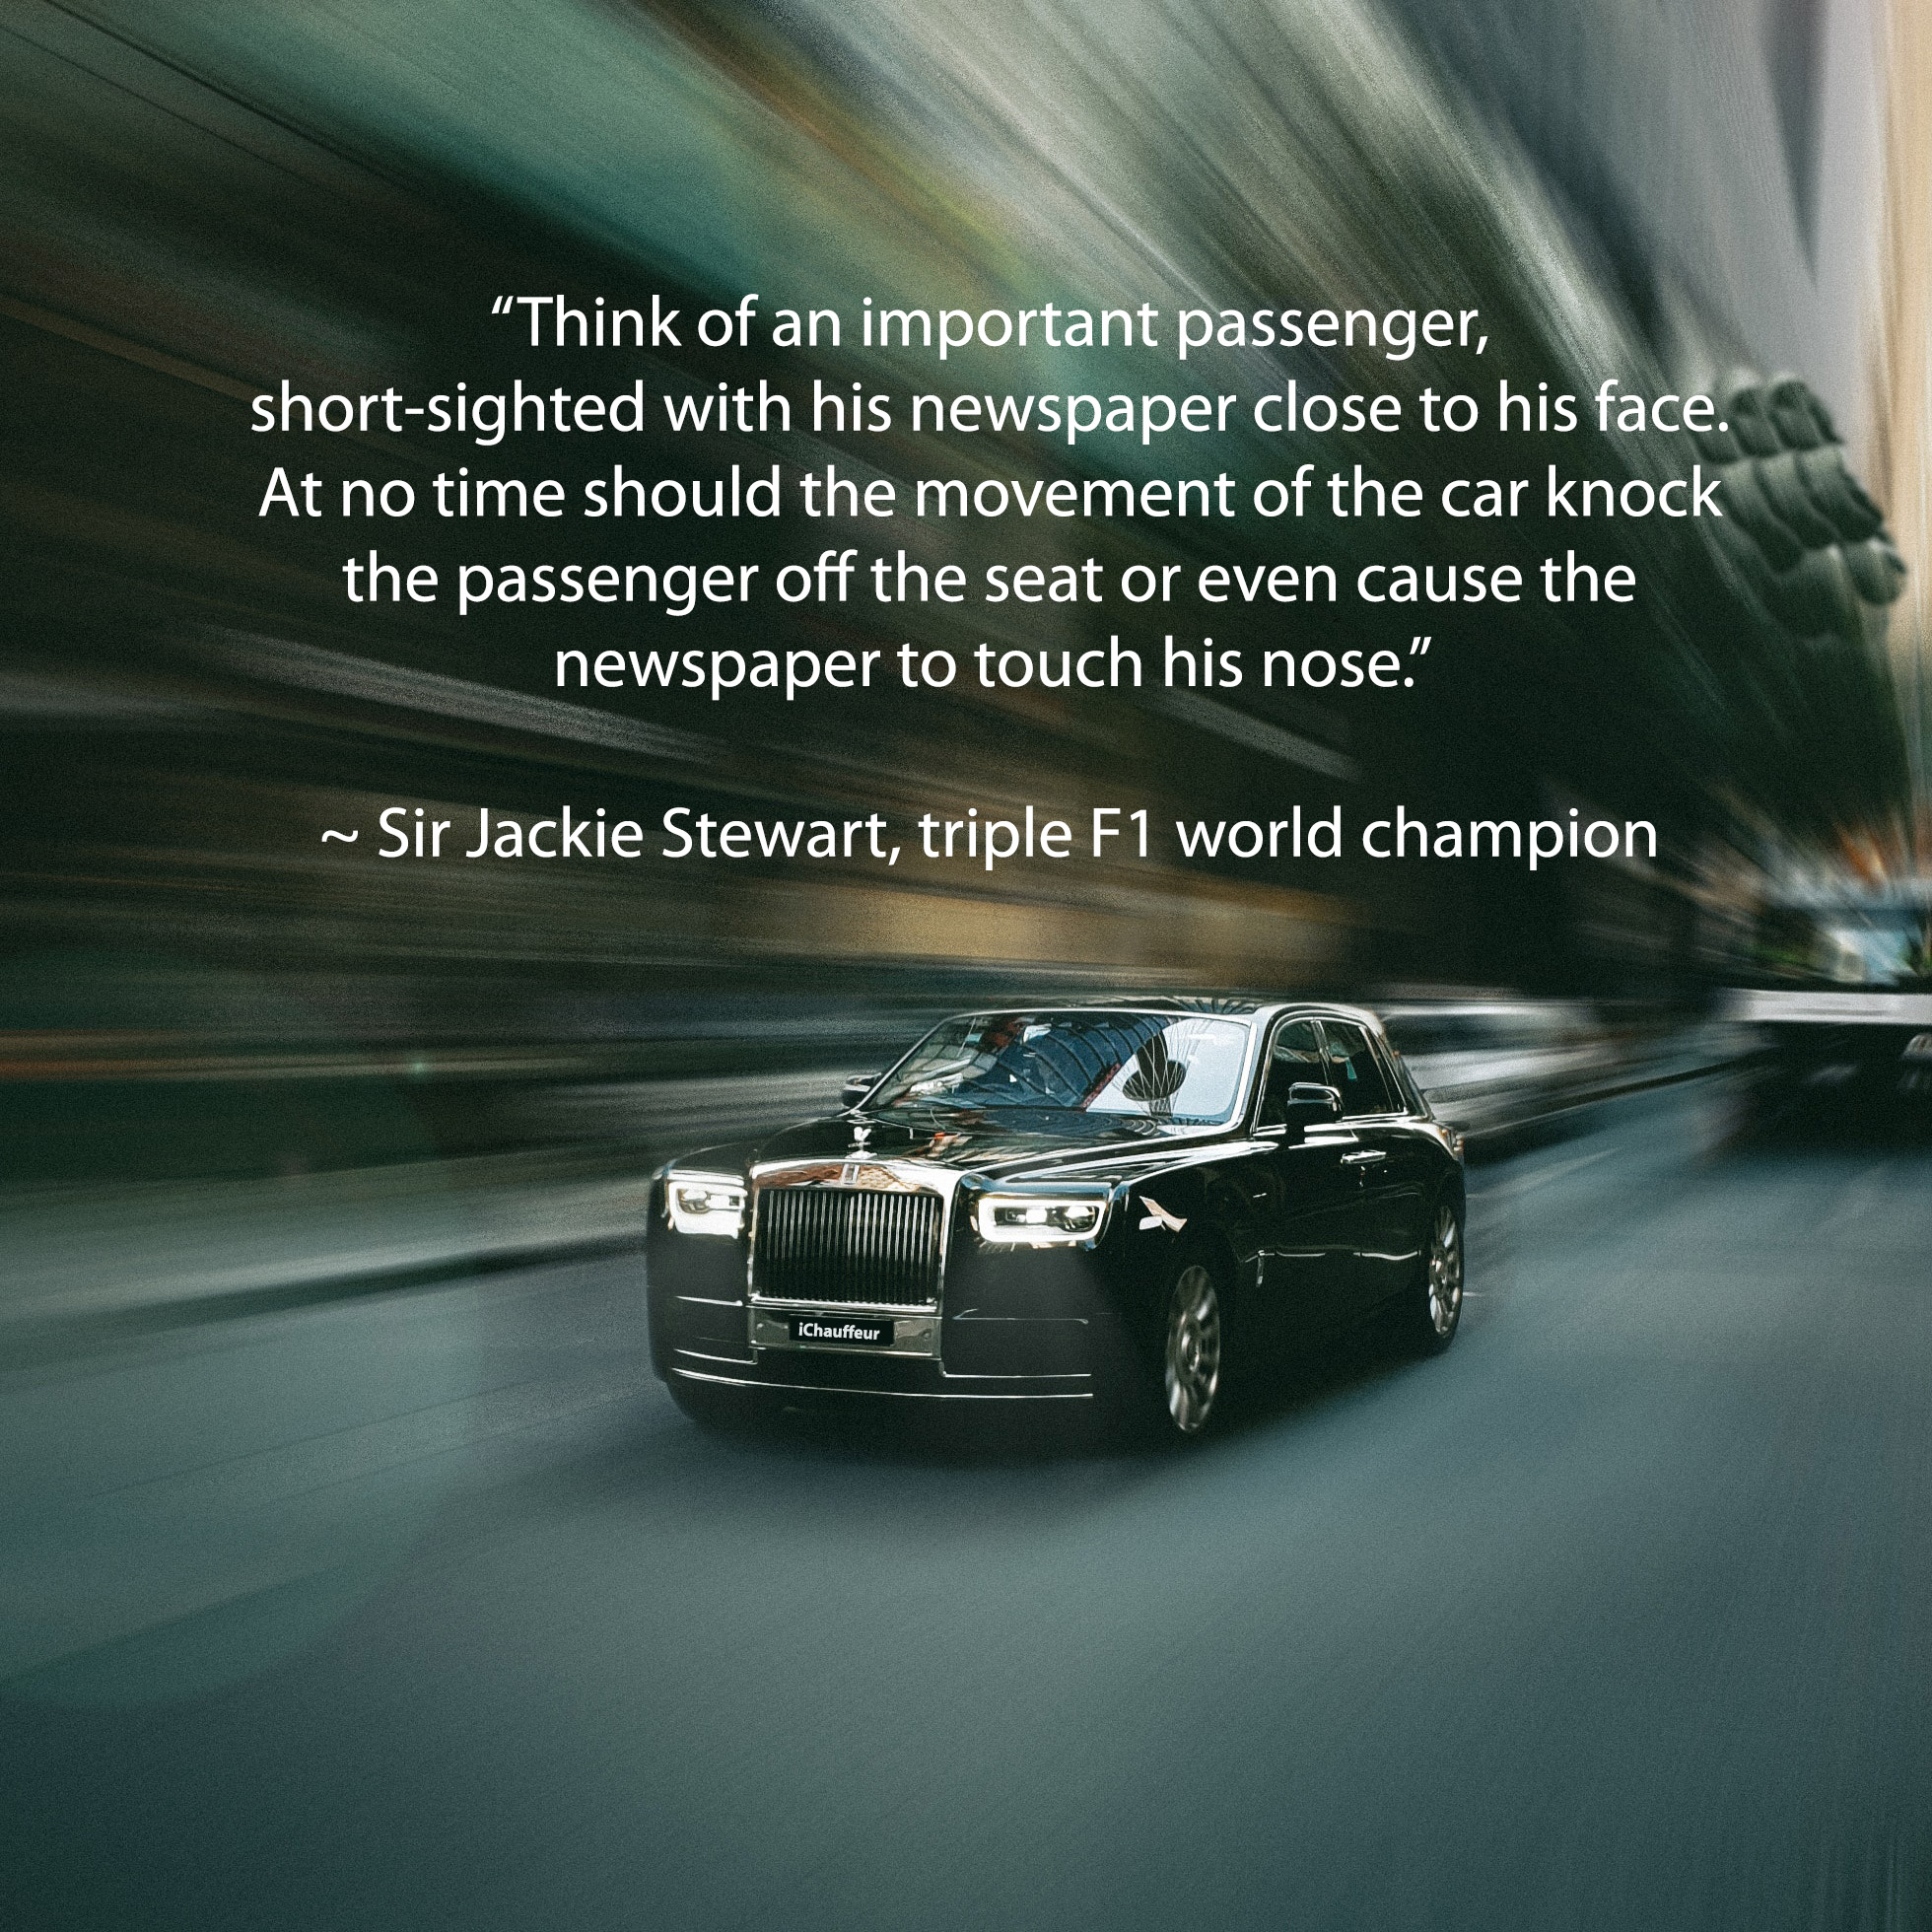 Rolls-Royce Phantom with the caption: 'Think of an important passenger, short-sighted with his newspaper close to his face, At no time should the movement of the car knock the passenger off the seat or even cause the newspaper to touch his nose.' ~ Jackie Stewart